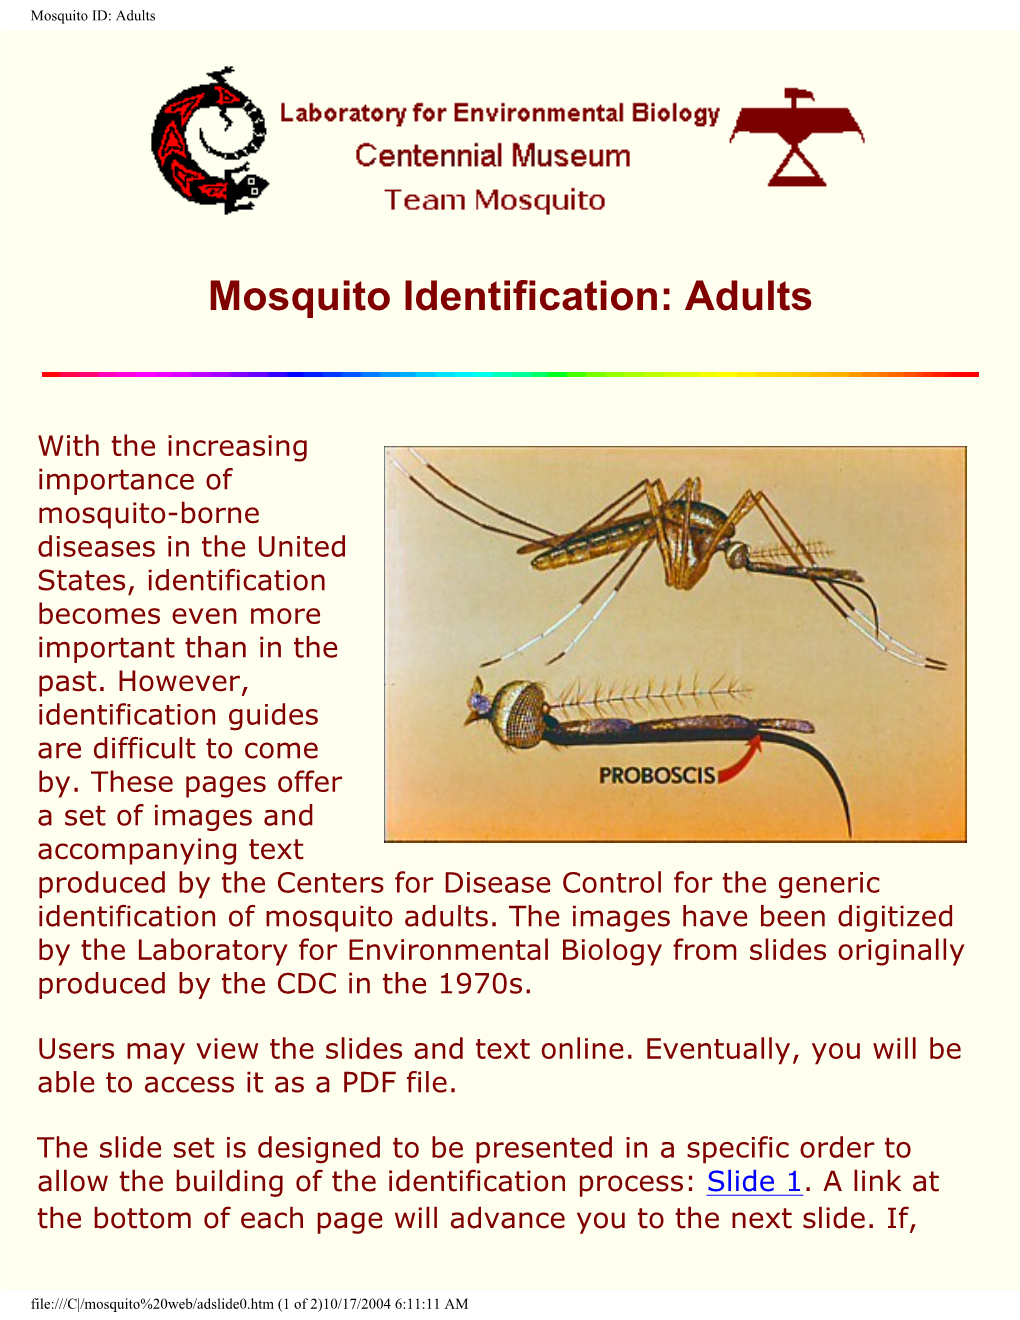 Mosquito Identification: Adults